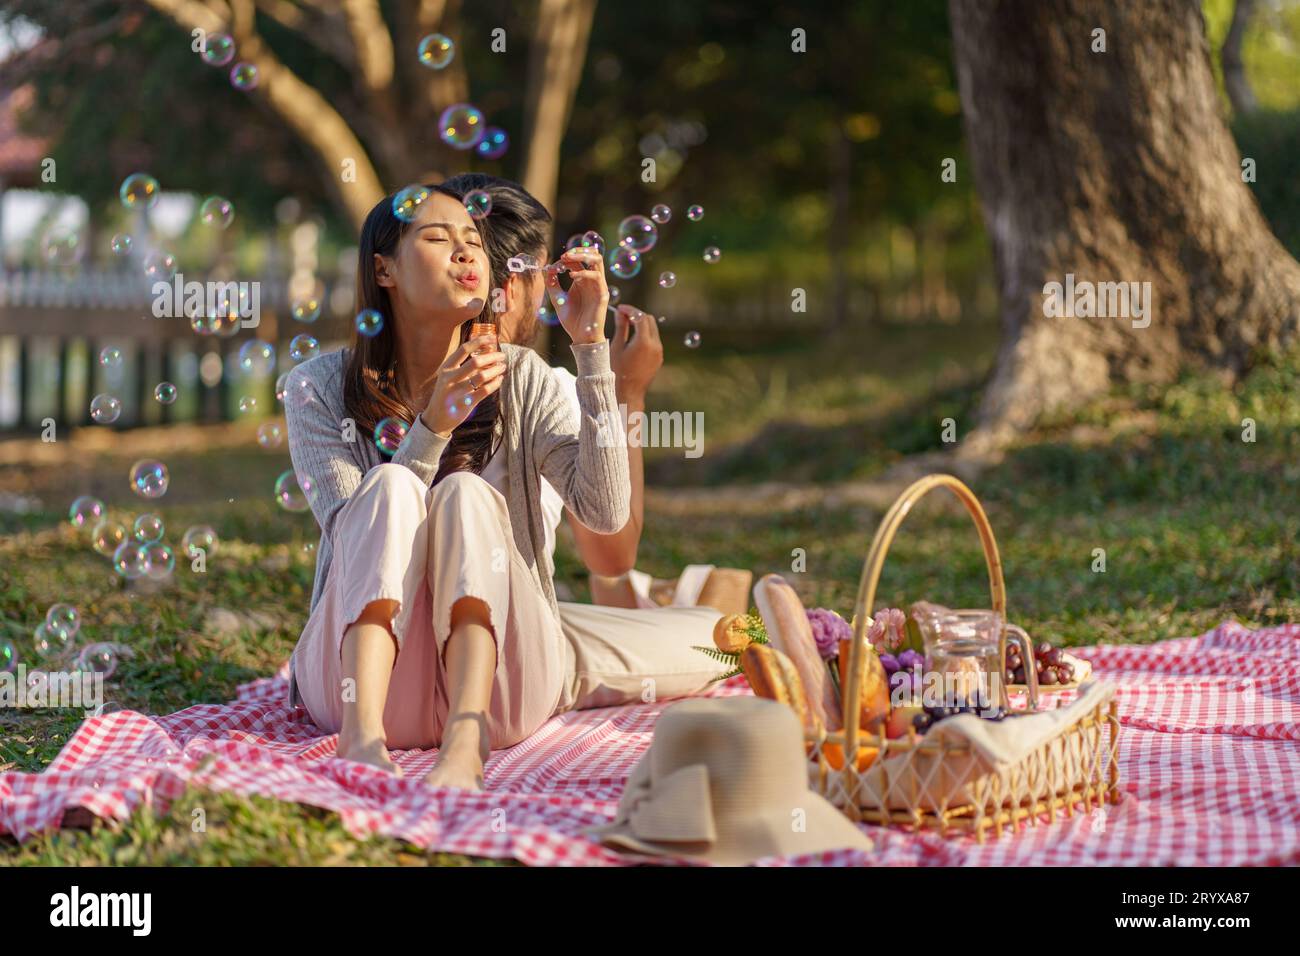 In love couple enjoying picnic time blow soap bubbles in park outdoors Picnic. happy couple relaxing togetherÂ with picnic Baske Stock Photo